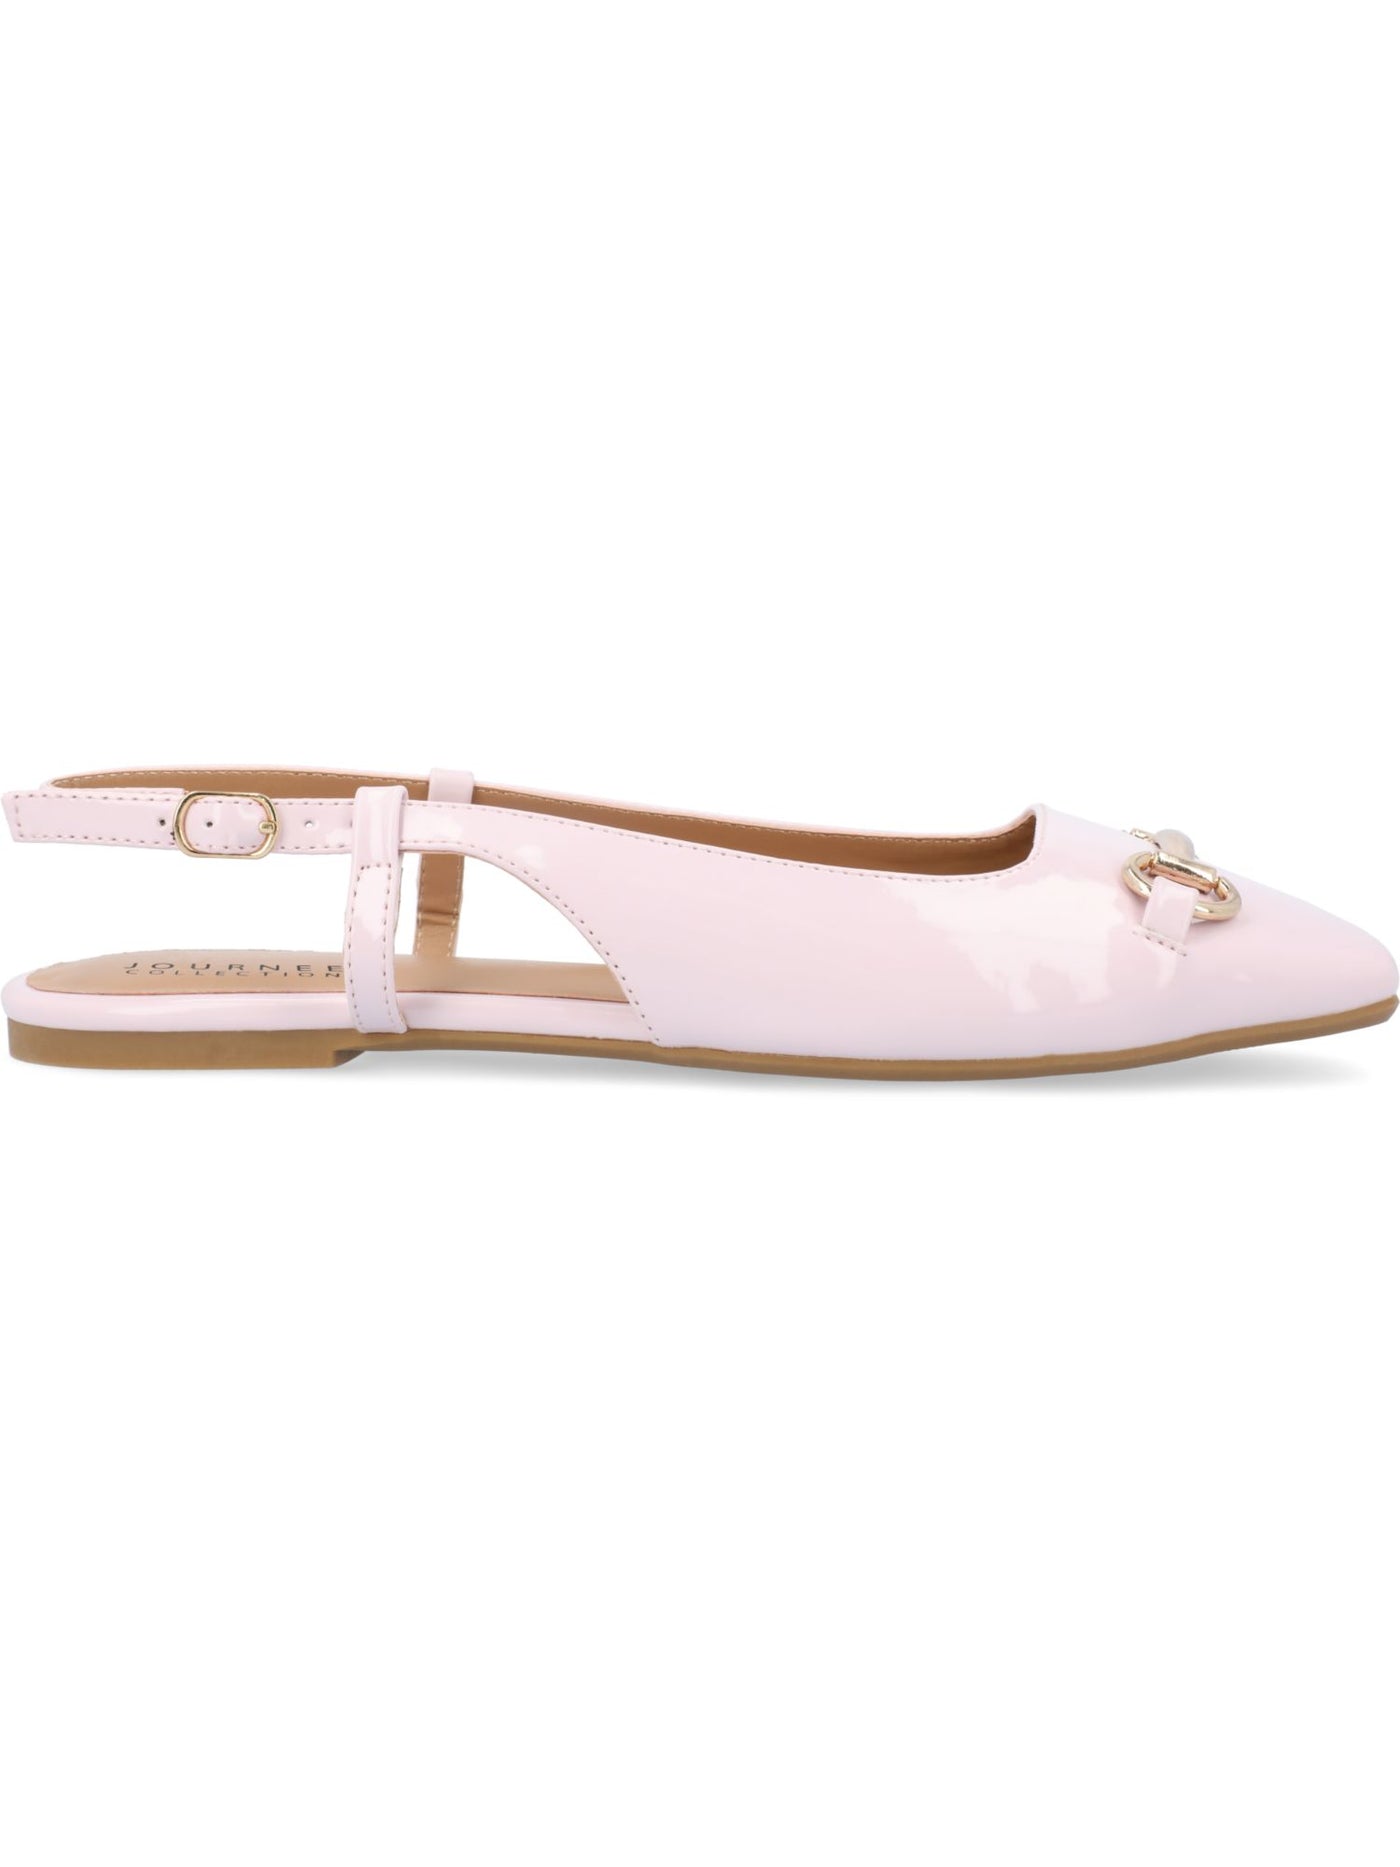 JOURNEE COLLECTION Womens Pink Metallic Hardware Padded Ceecy Square Toe Buckle Slingback 8